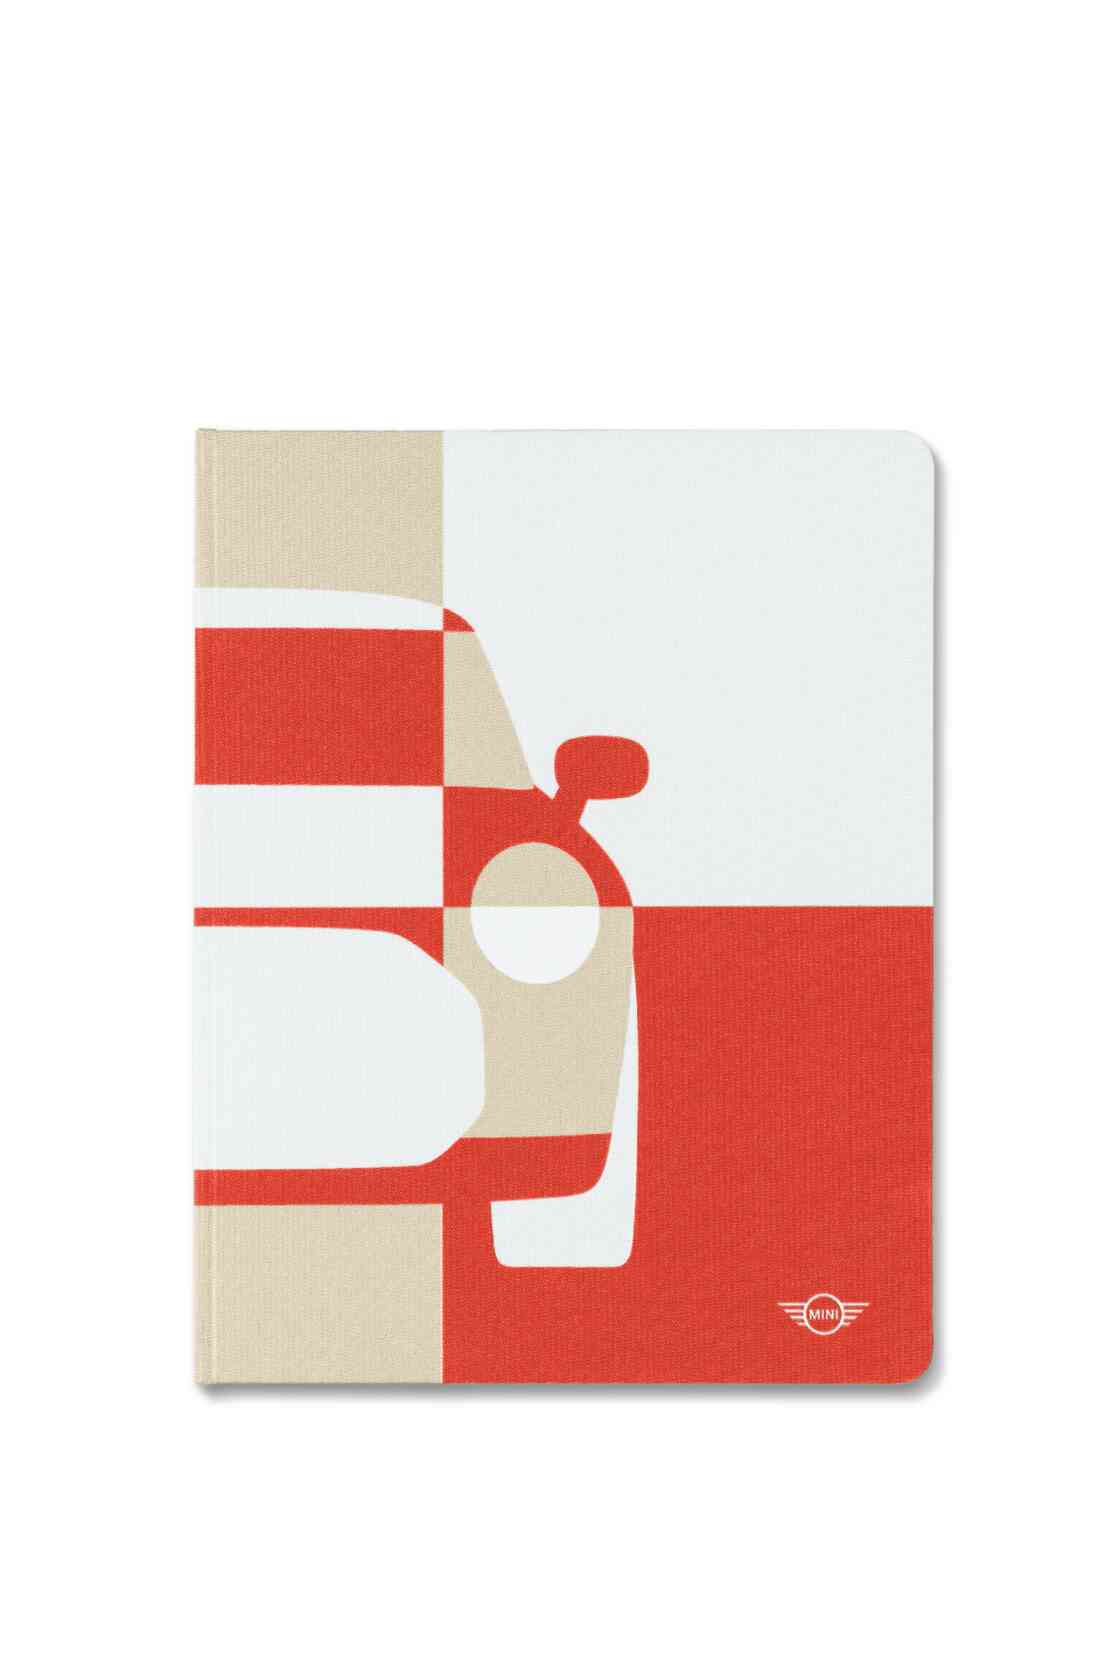 MINI Car Tile Notebook Red